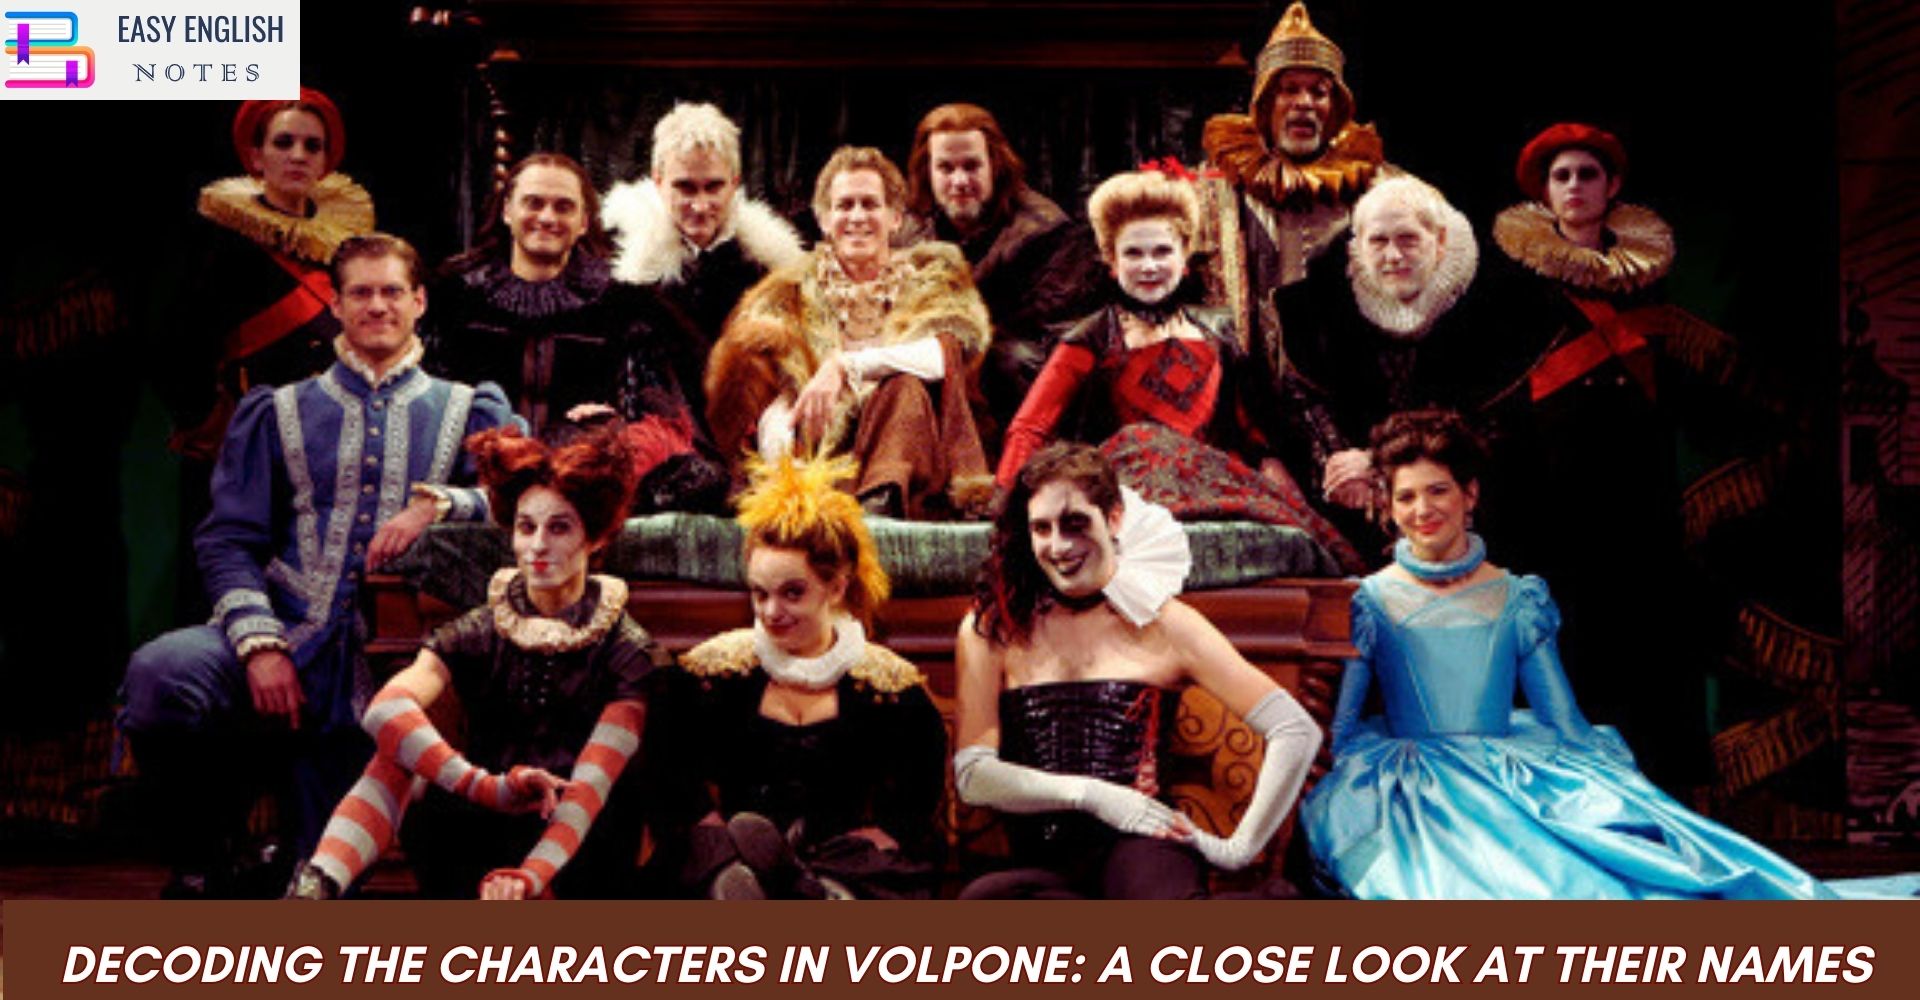 Decoding the Characters in Volpone: A Close Look at their Names